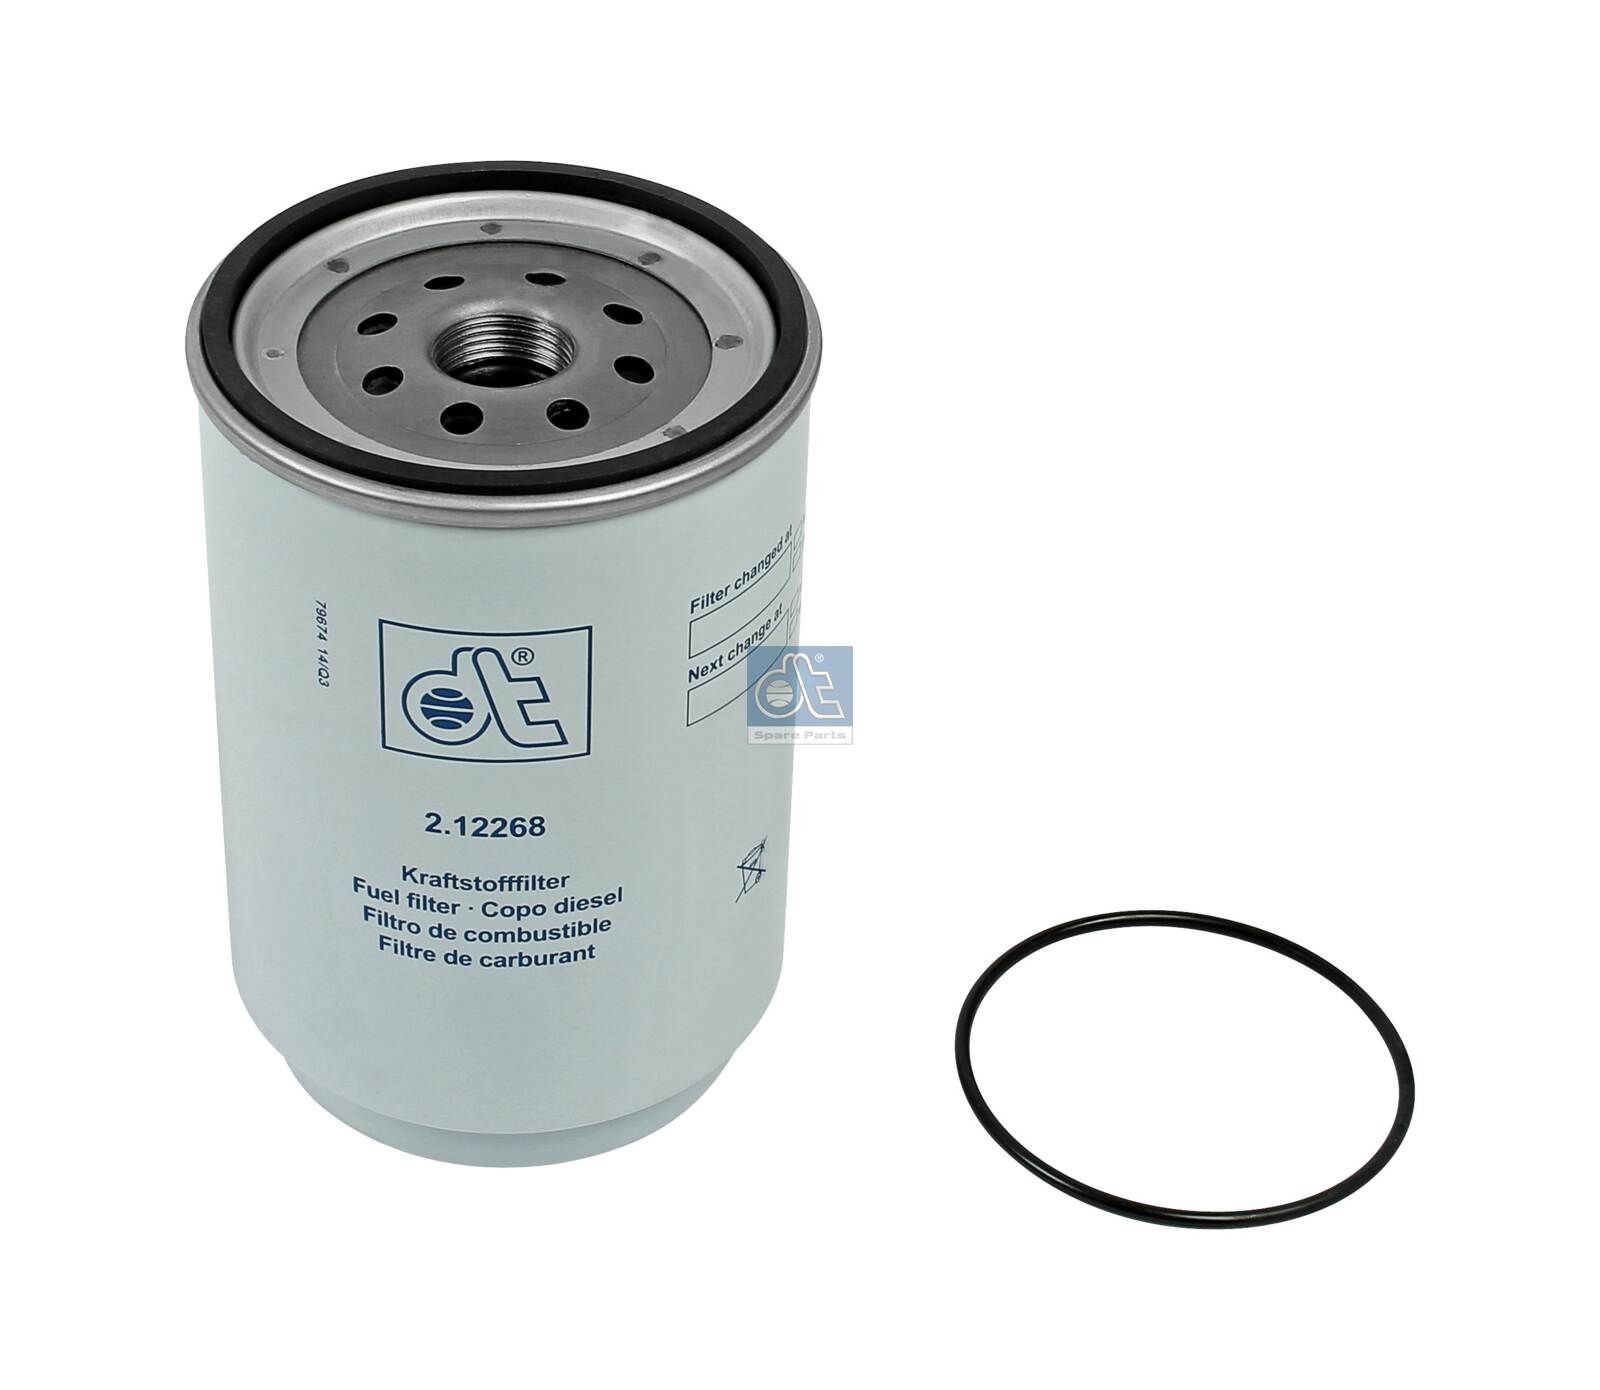 WK 11 001 x DT Spare Parts 2.12268 Fuel filter 2078 8794